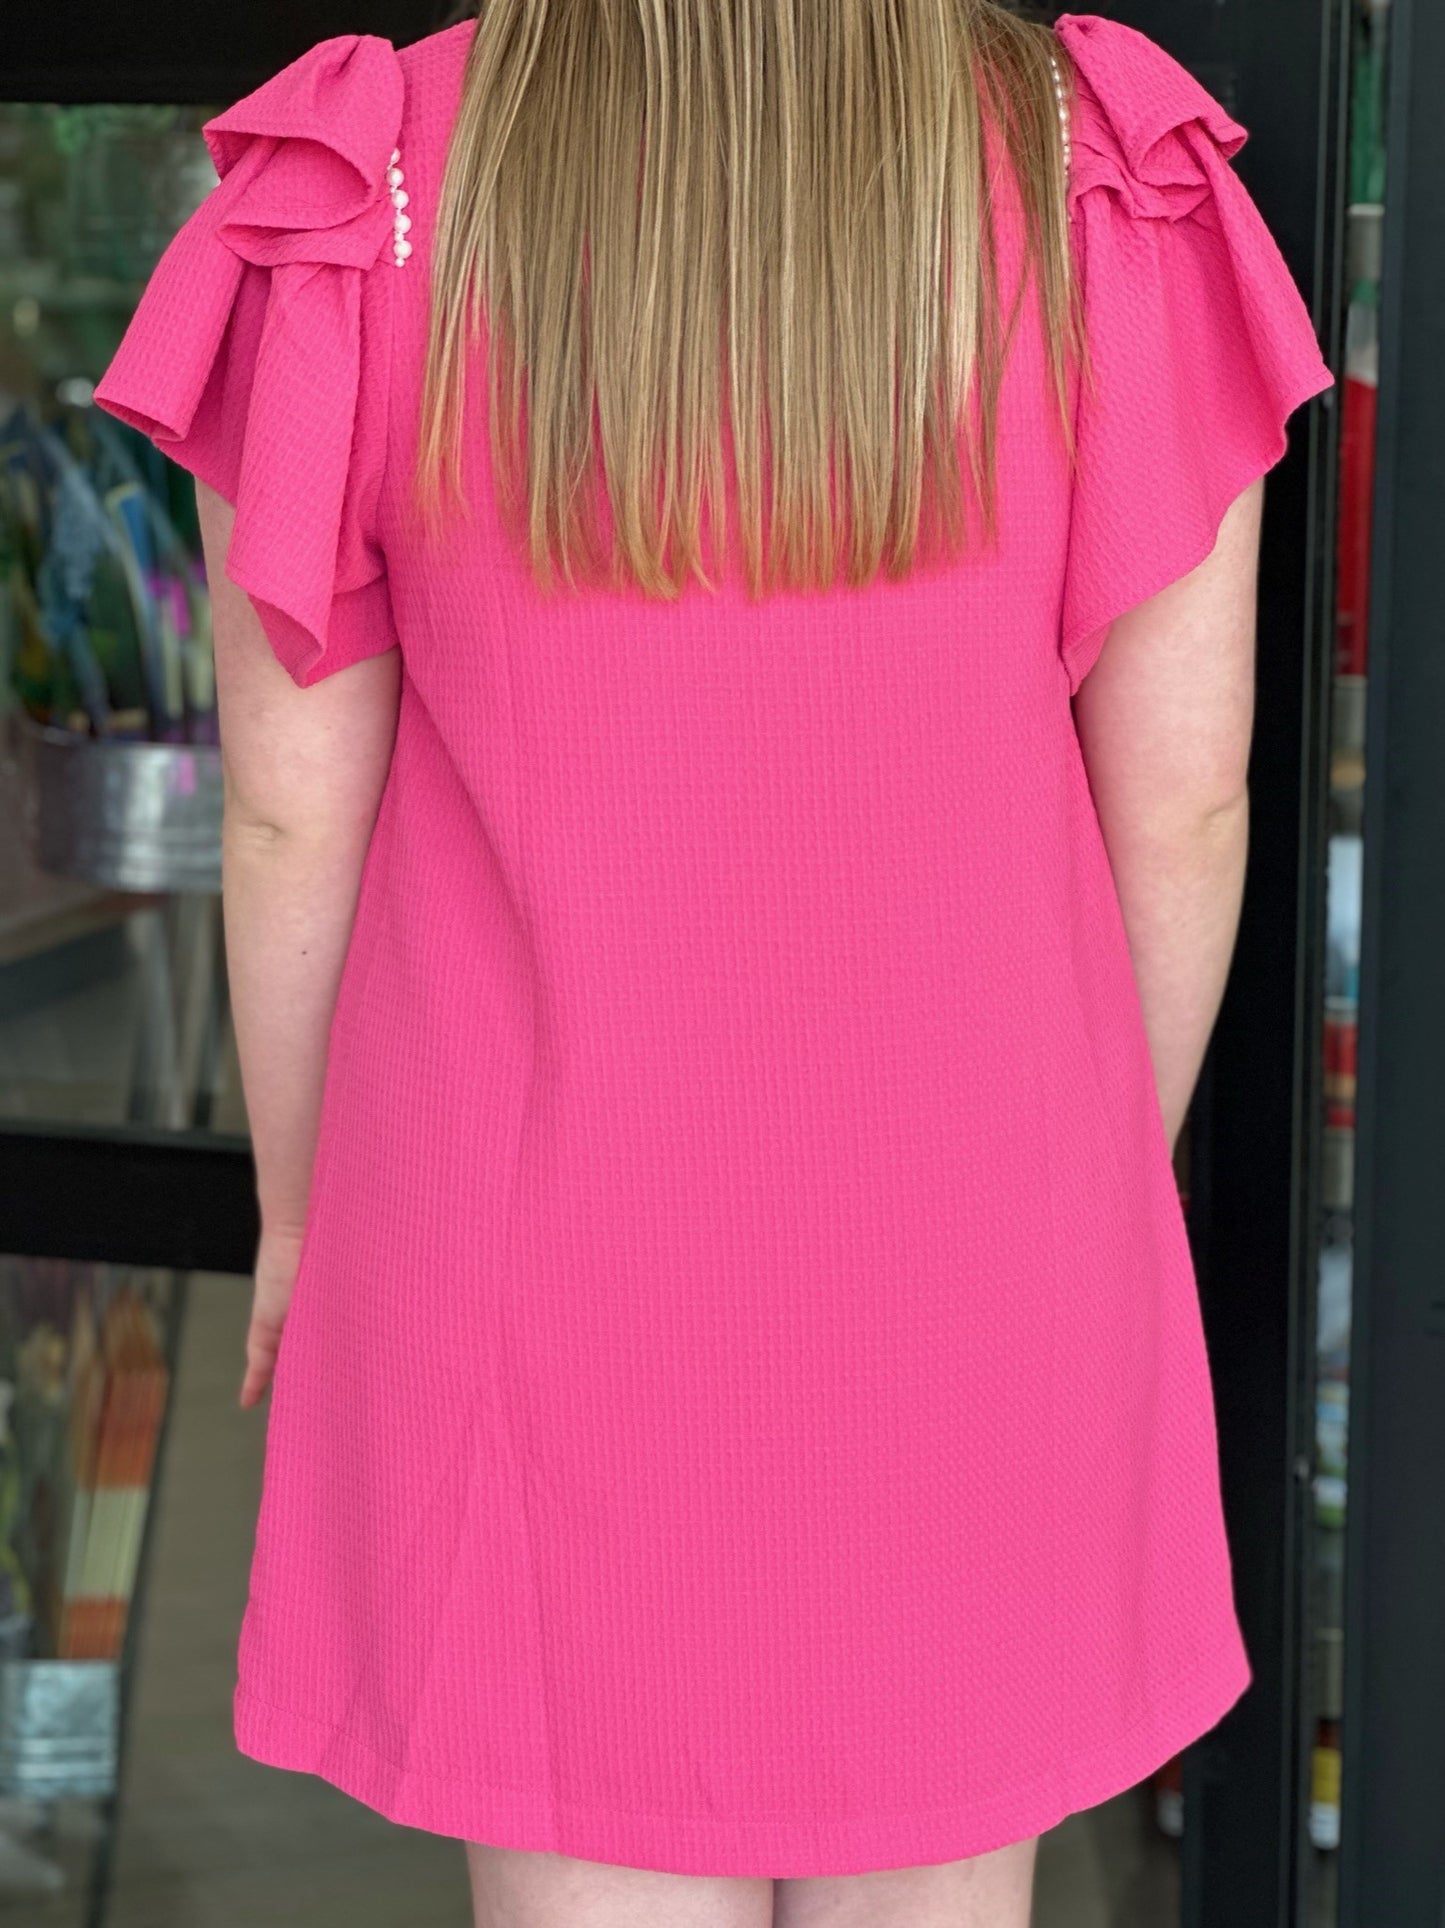 Barbie Pink Dress with Pearl Detail